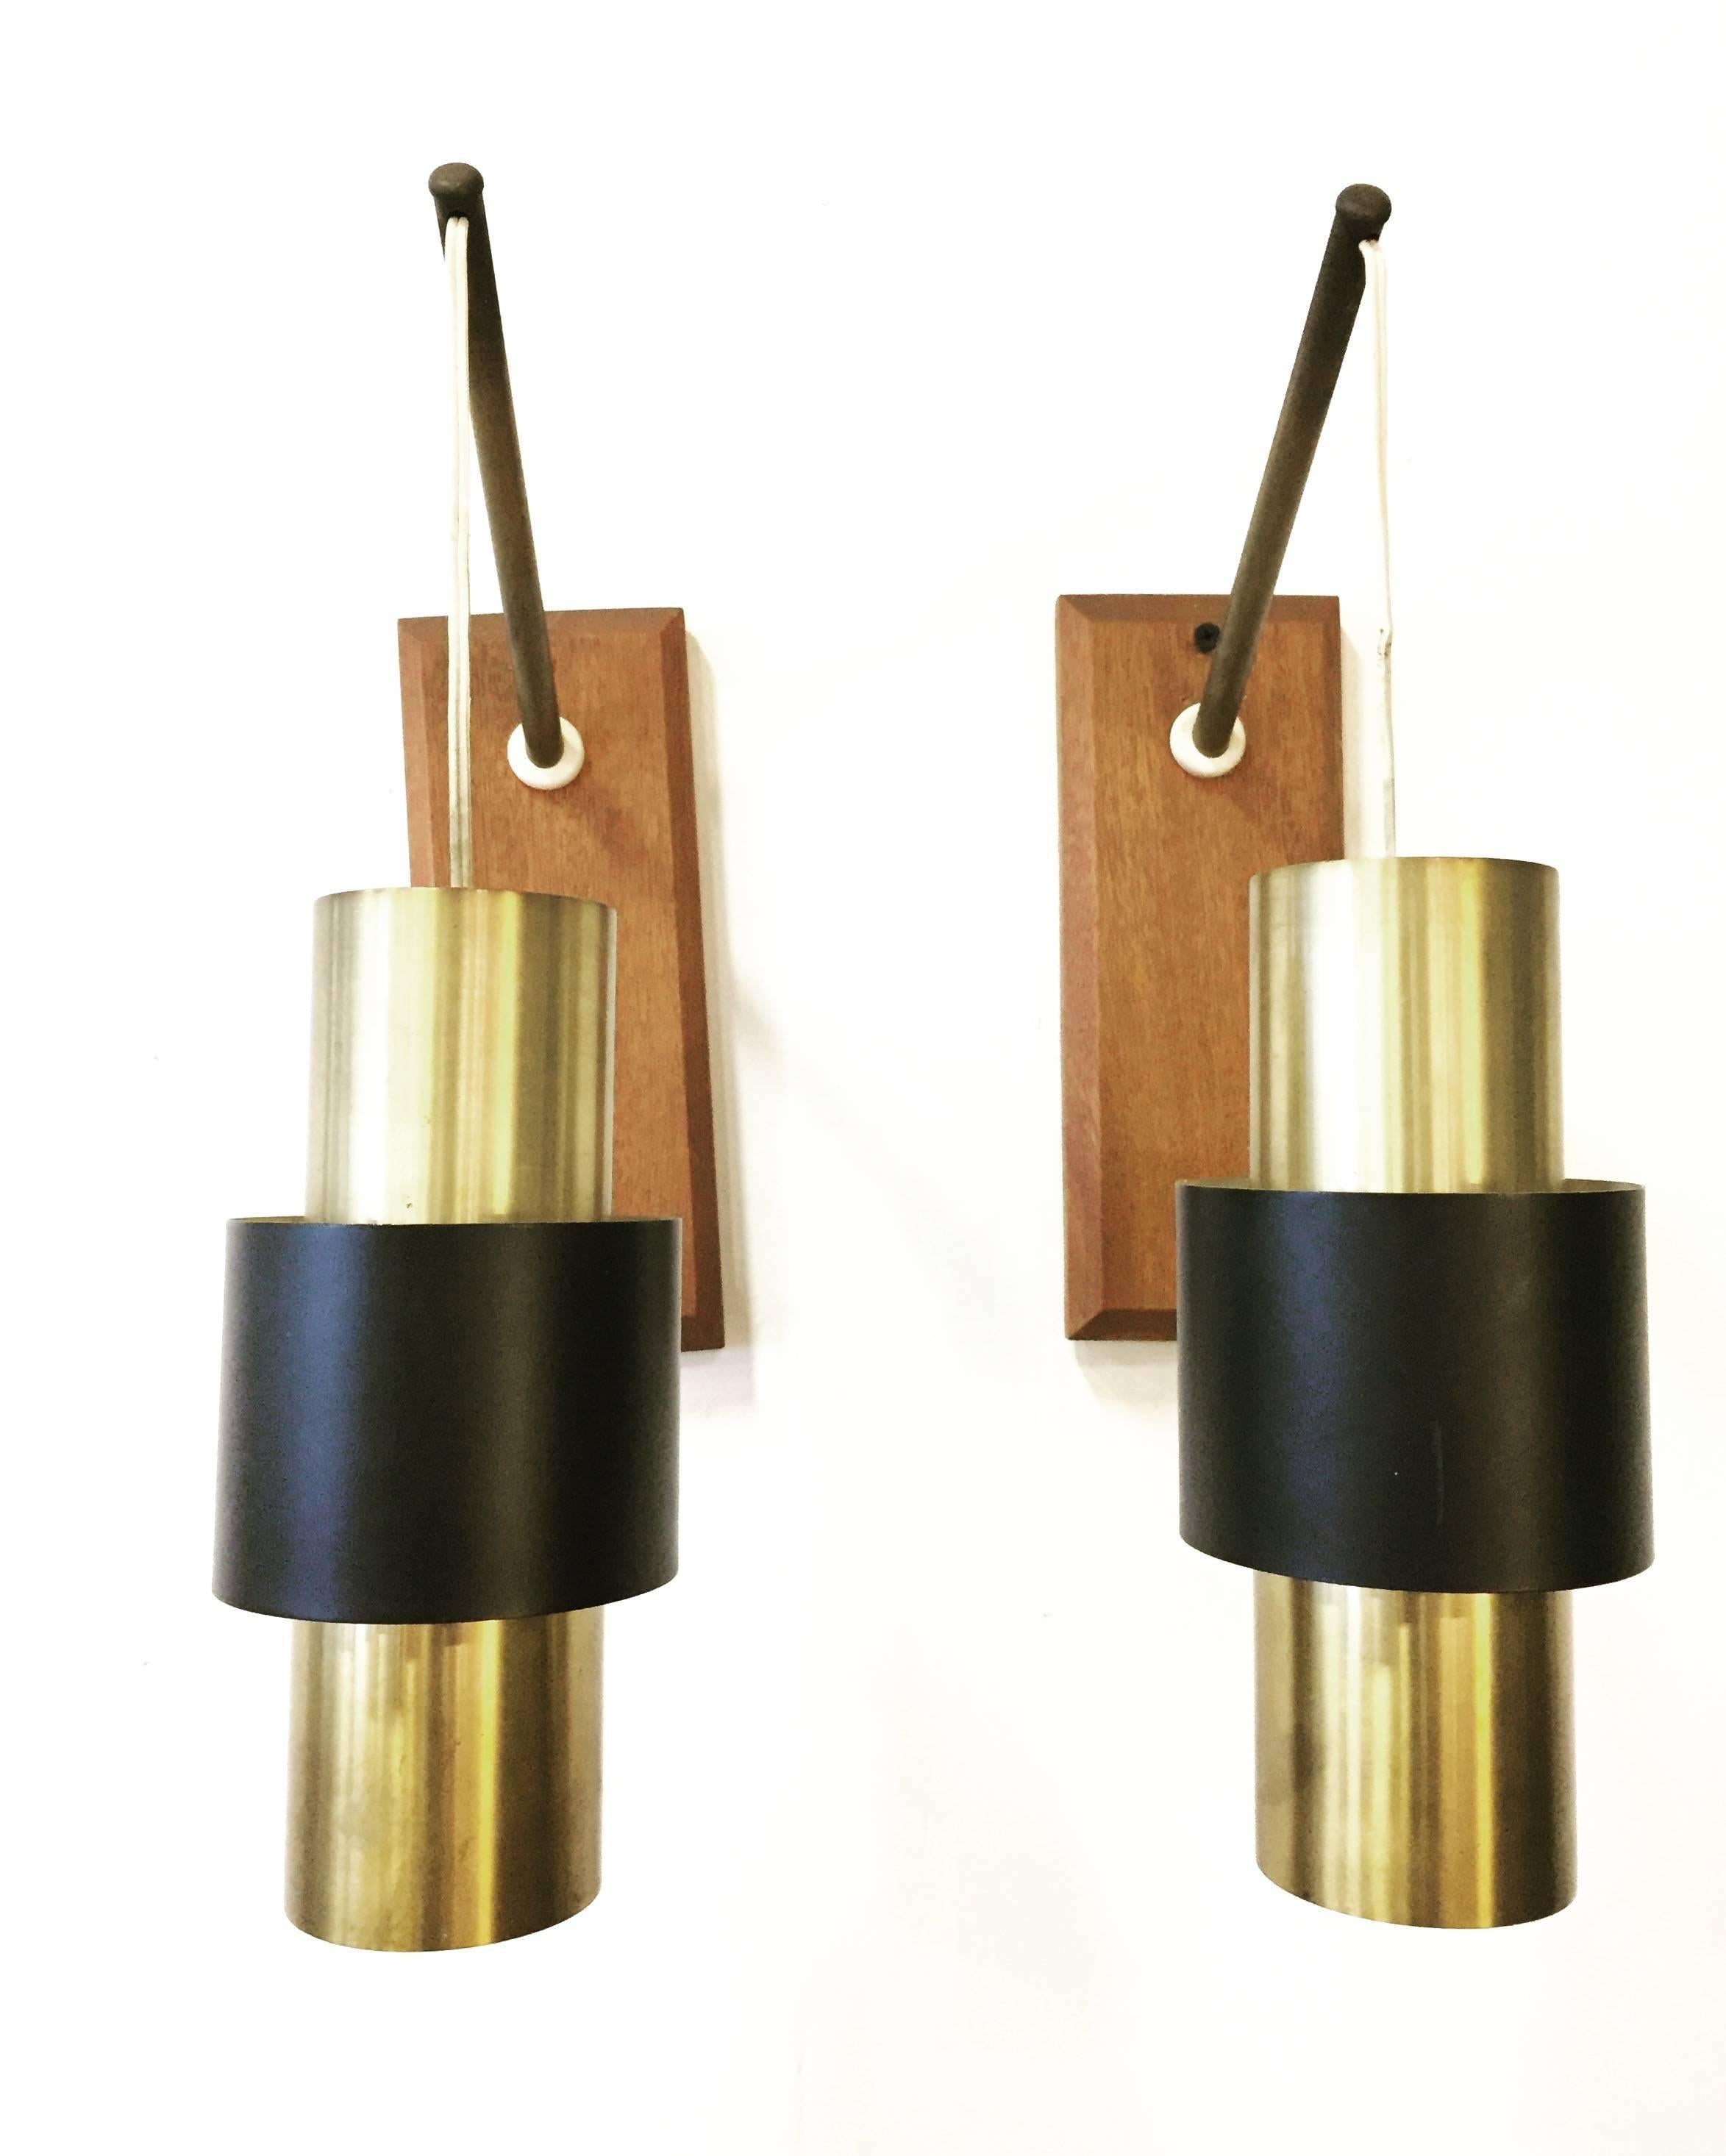 Awesome Mid-Century Danish sconces by Jo Hammerborg. The Saturn series is aptly names for the ring around the central body that gives the illusion of floating and celestial drift. As found, very good condition.